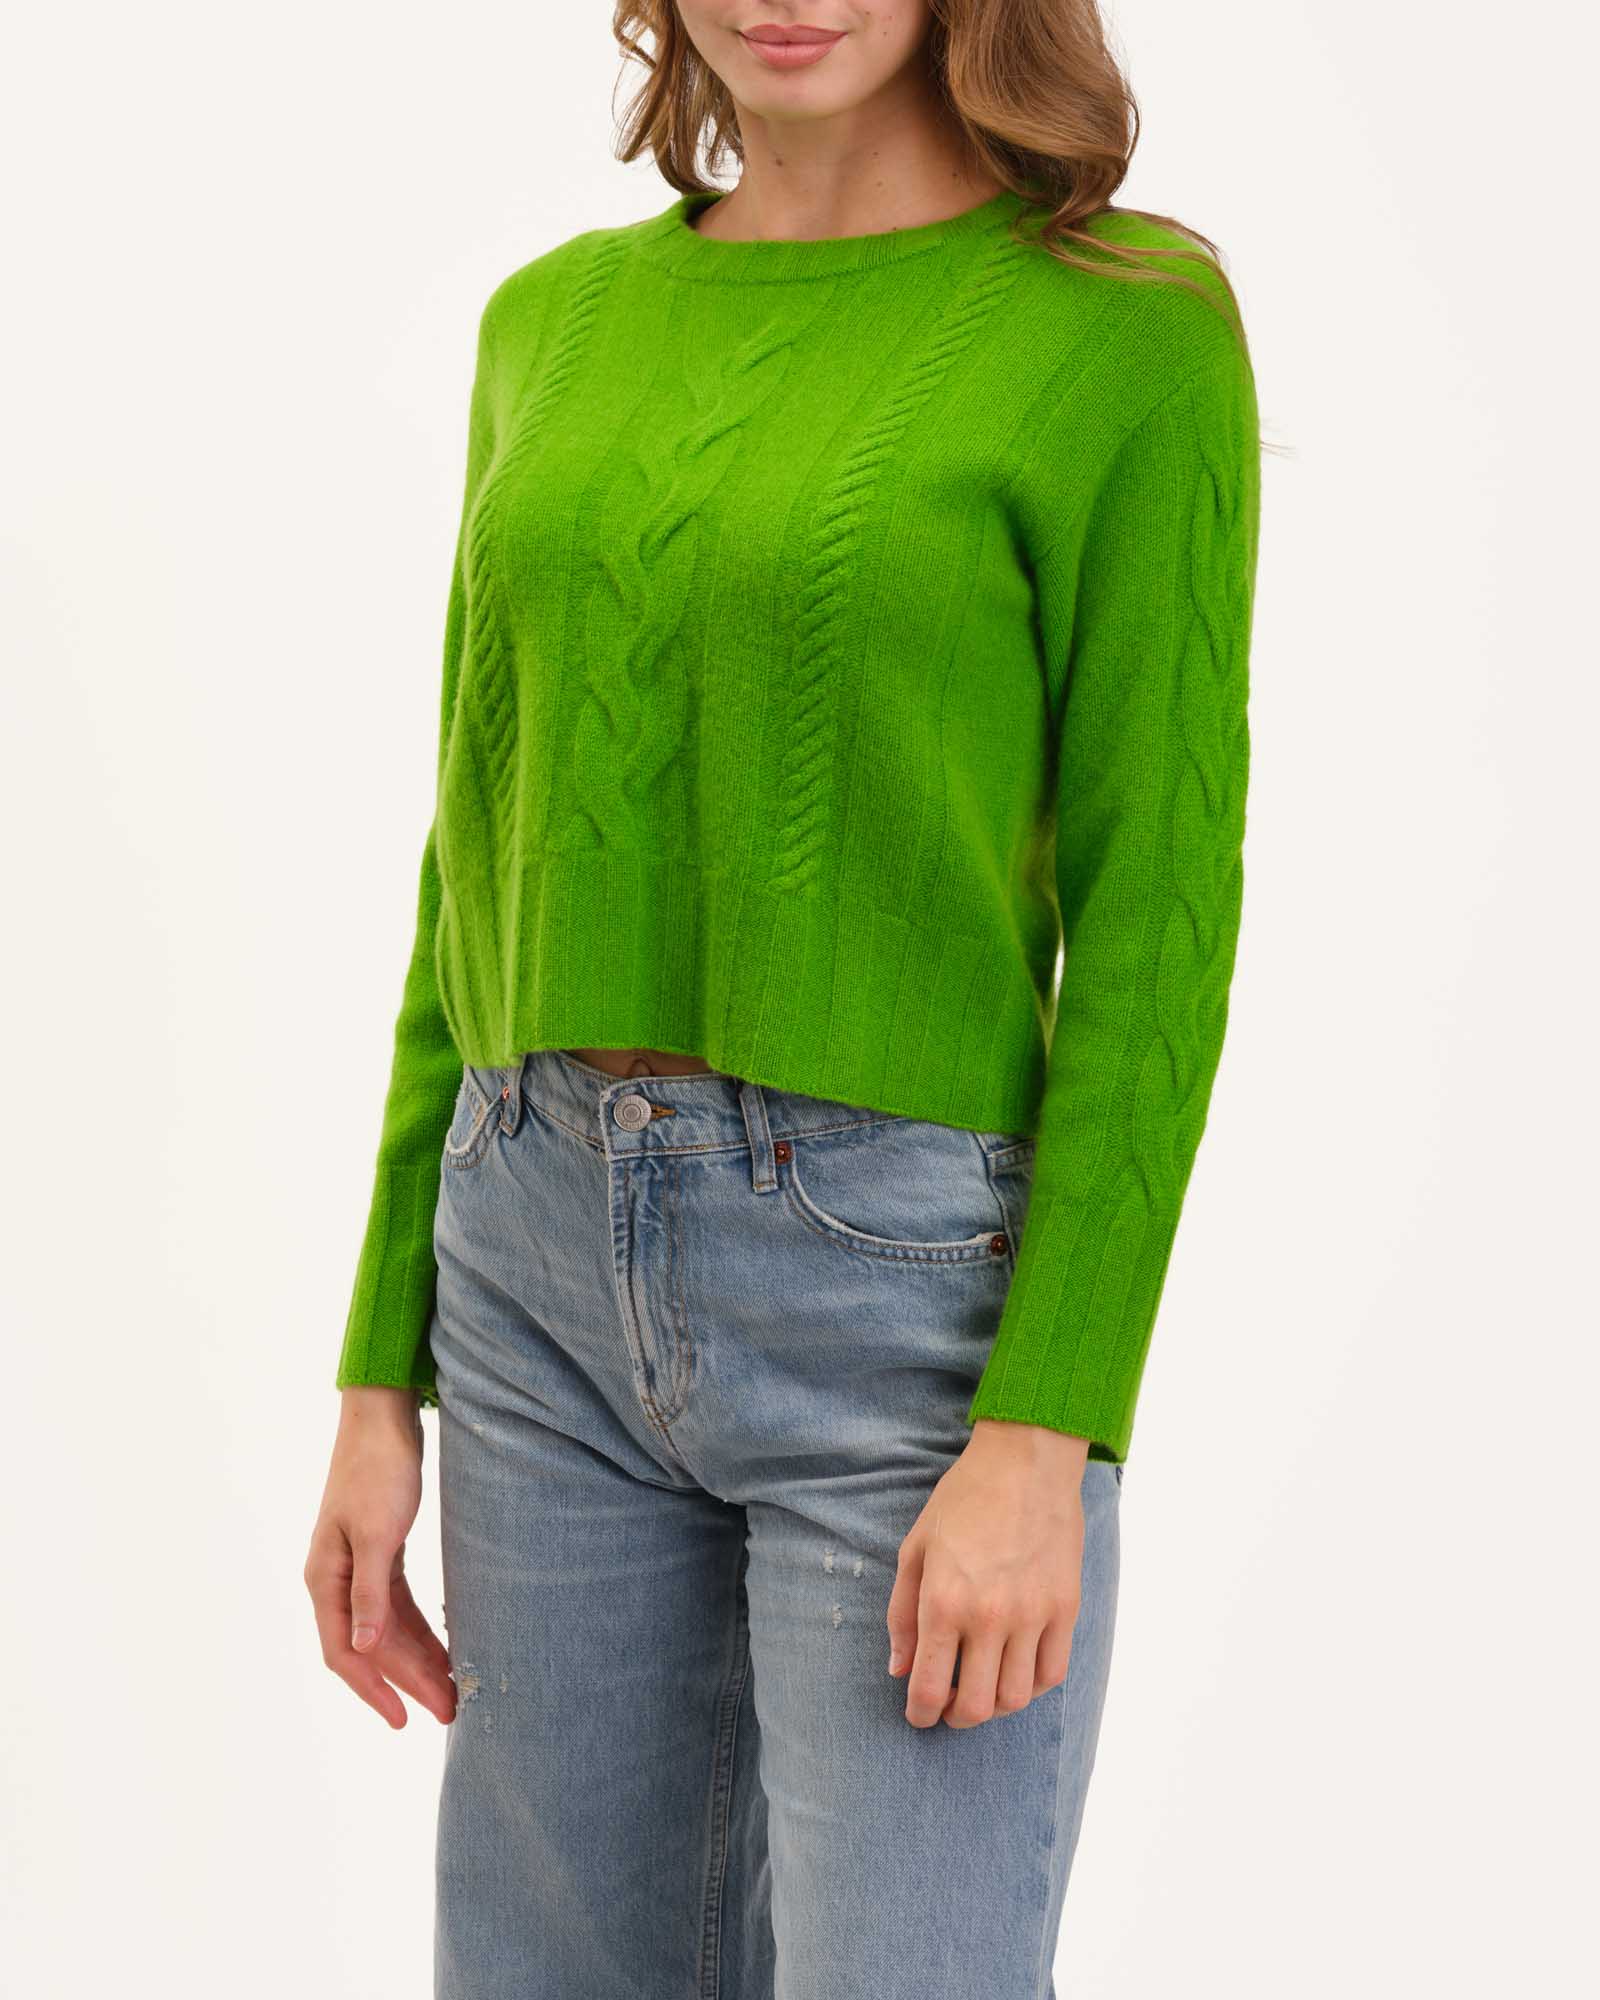 Cashmere Cable Crew Neck Sweater, Electric Green | Elie Elie Tahari